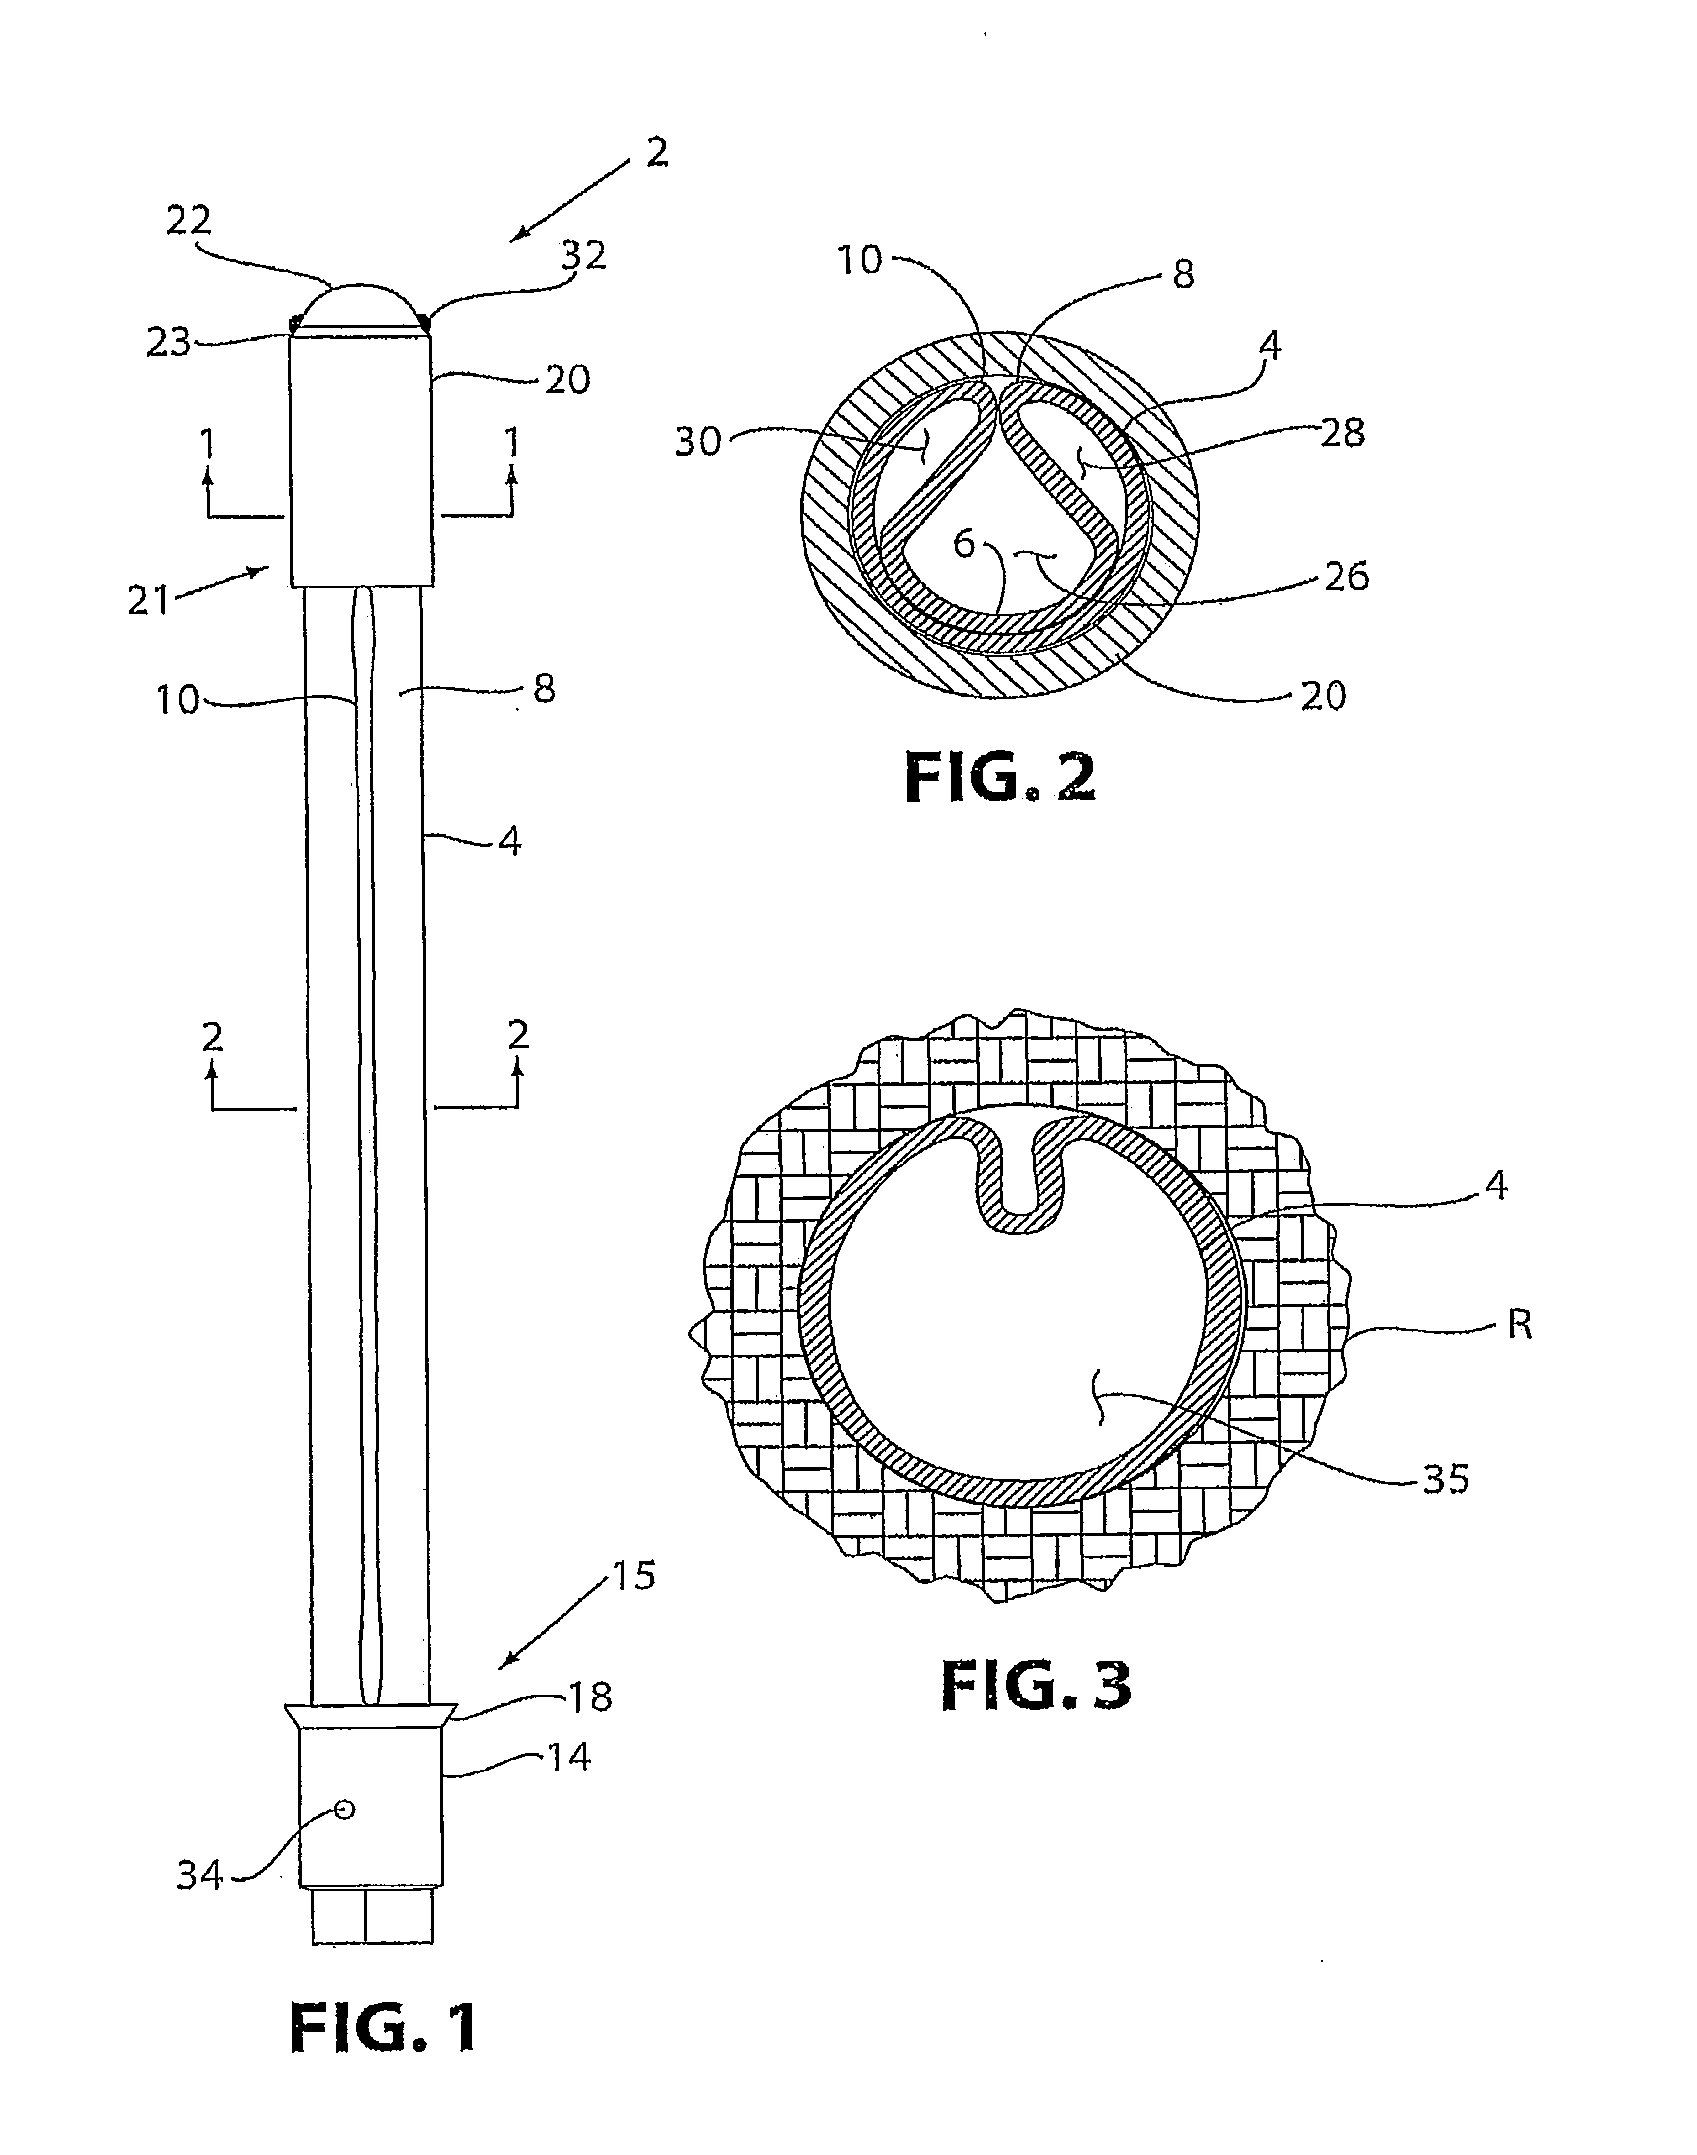 Expandable Bolt With Thrust Element